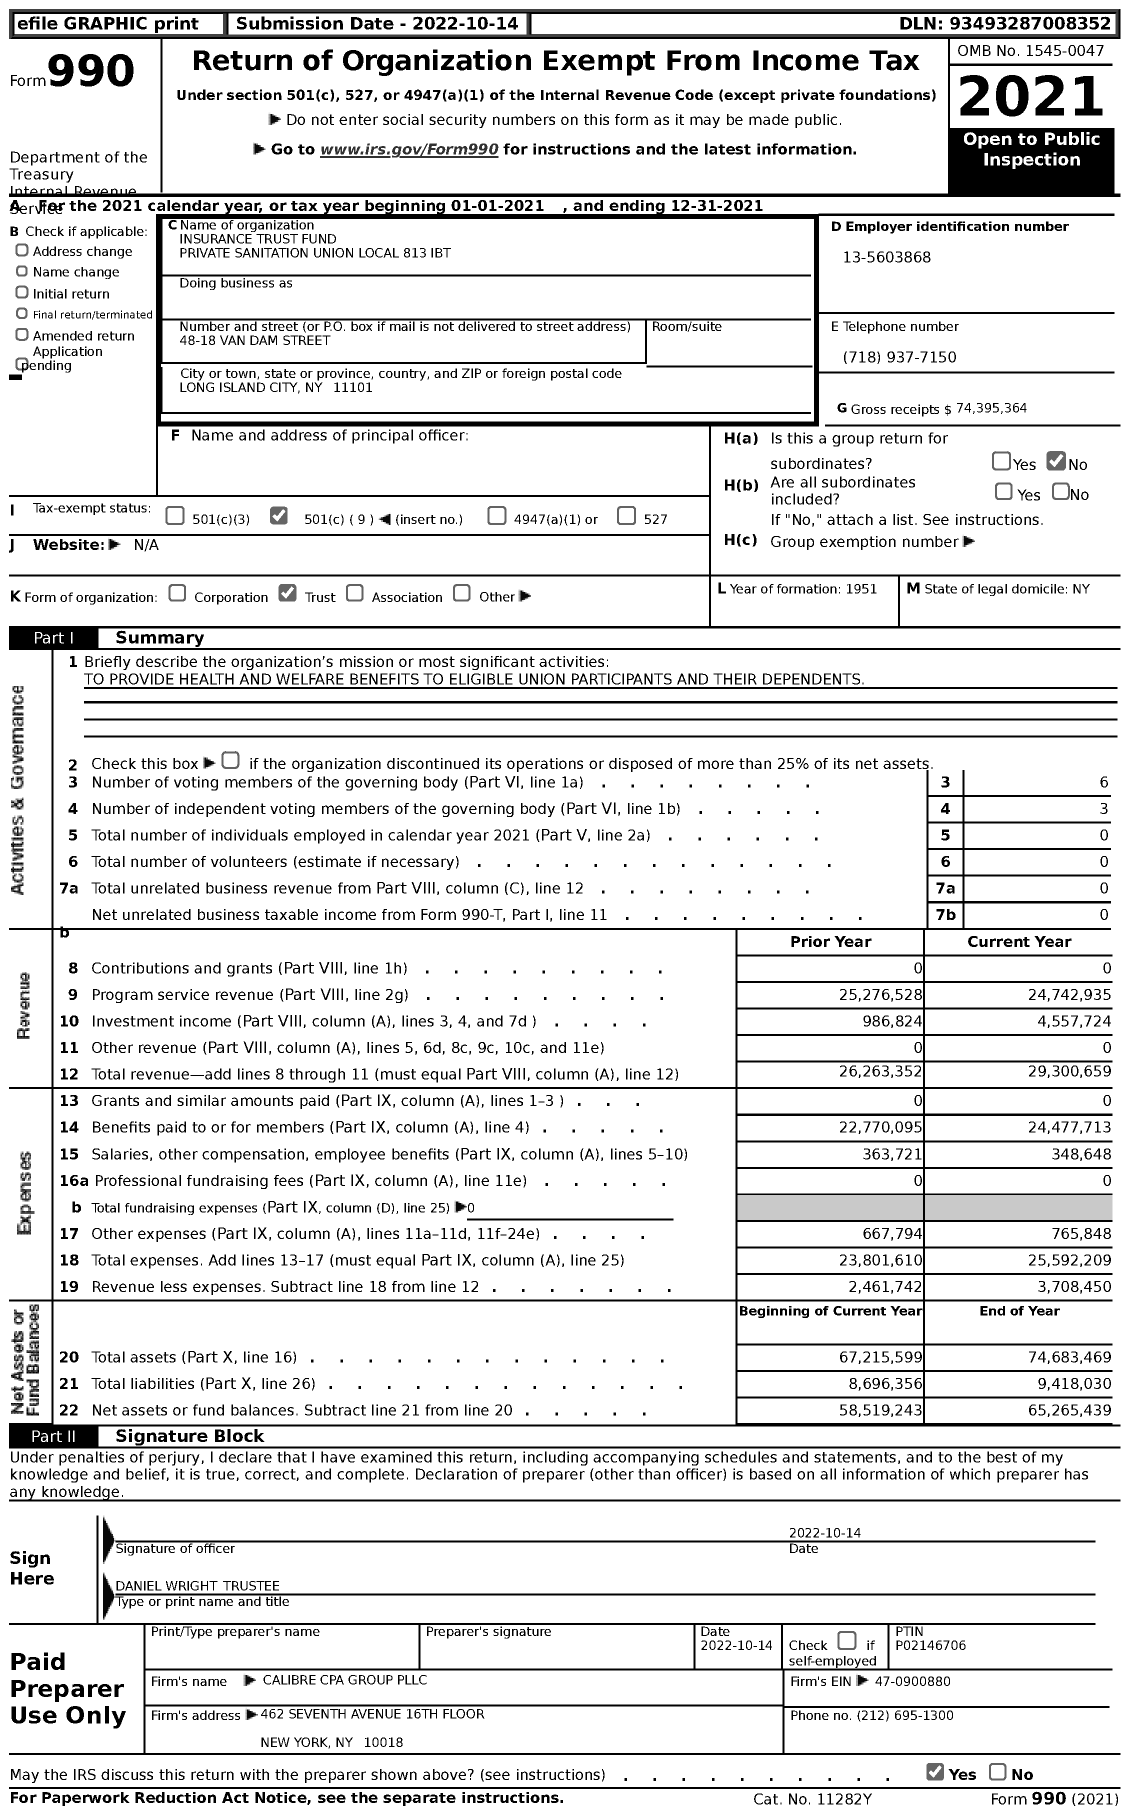 Image of first page of 2021 Form 990 for Insurance Trust Fund Private Sanitation Union Local 813 Ibt